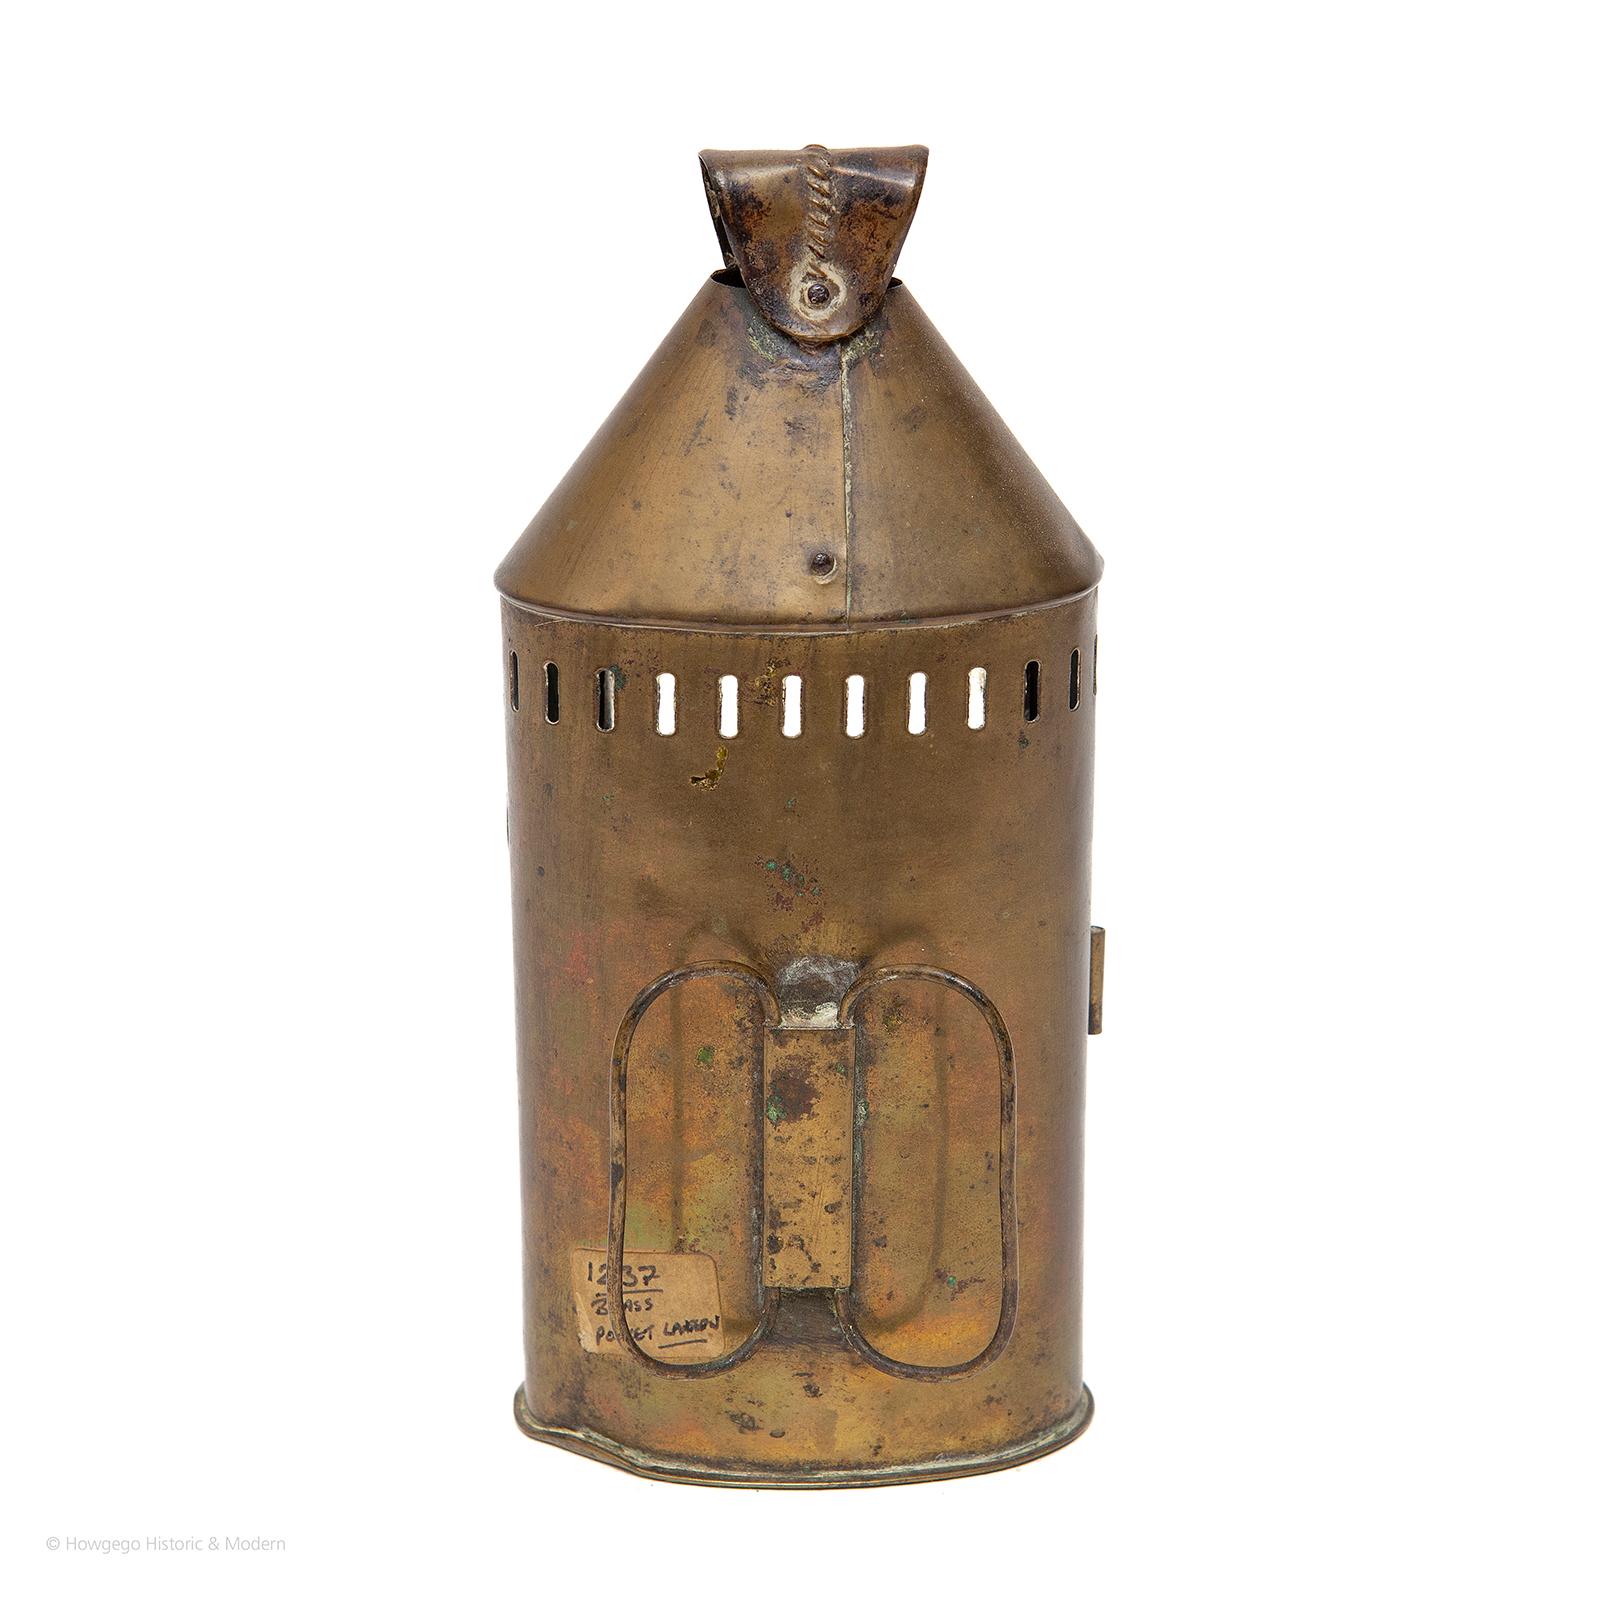 - Rare survival of a personal object made for practical everyday use. Although they would have been made in fairly significant numbers, surviving handheld, portable brass lanterns for personal use are rare.
- This example is in excellent original